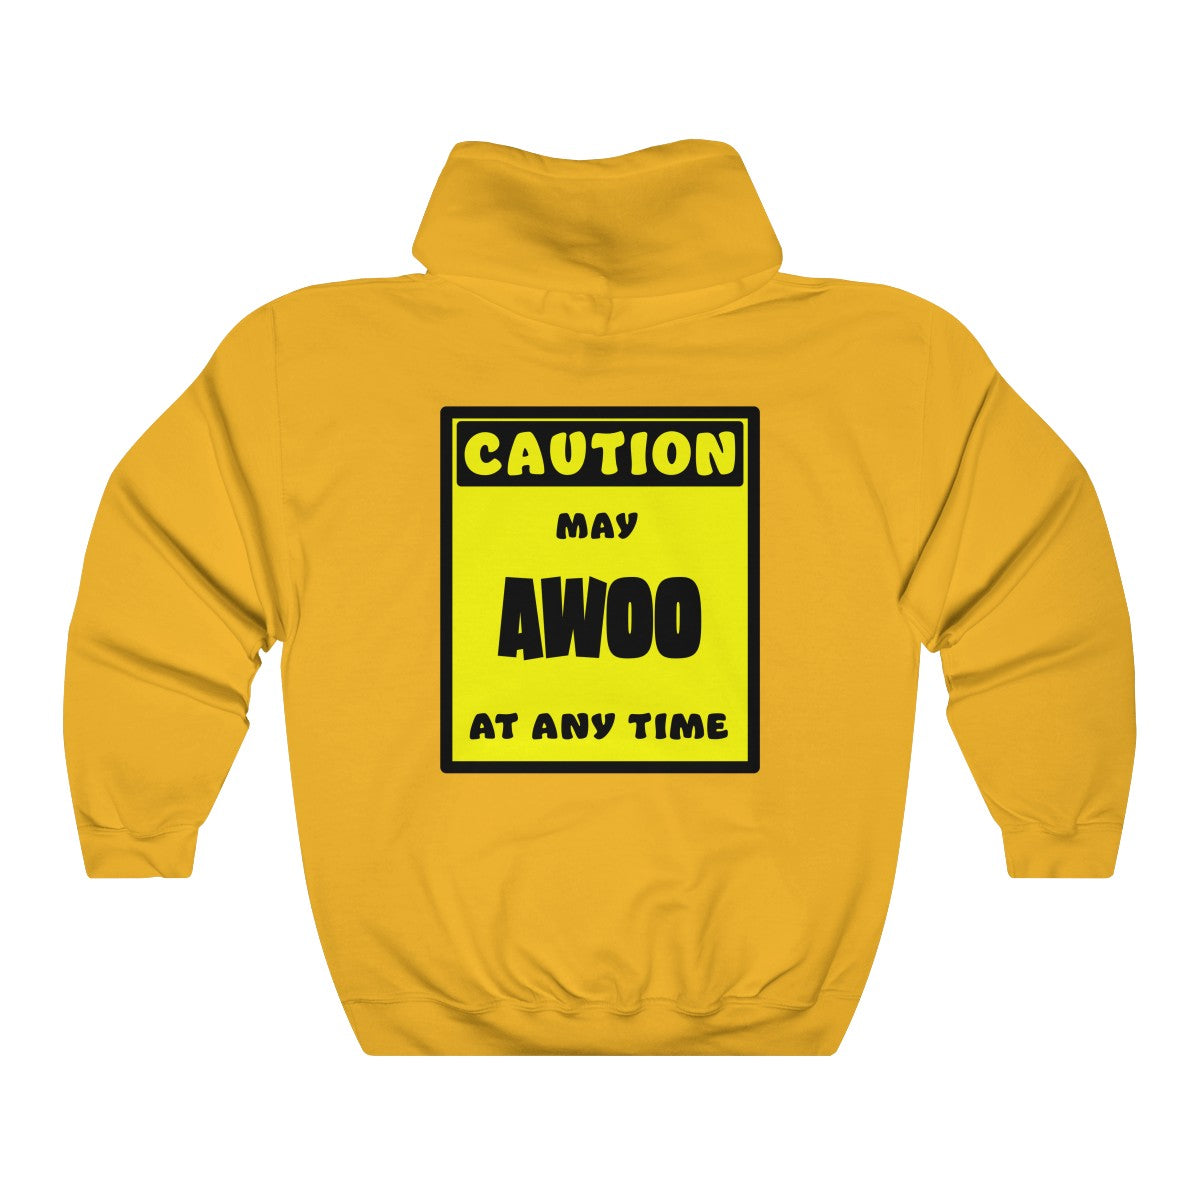 CAUTION! May AWOO at any time! - Hoodie Hoodie AFLT-Whootorca Gold S 